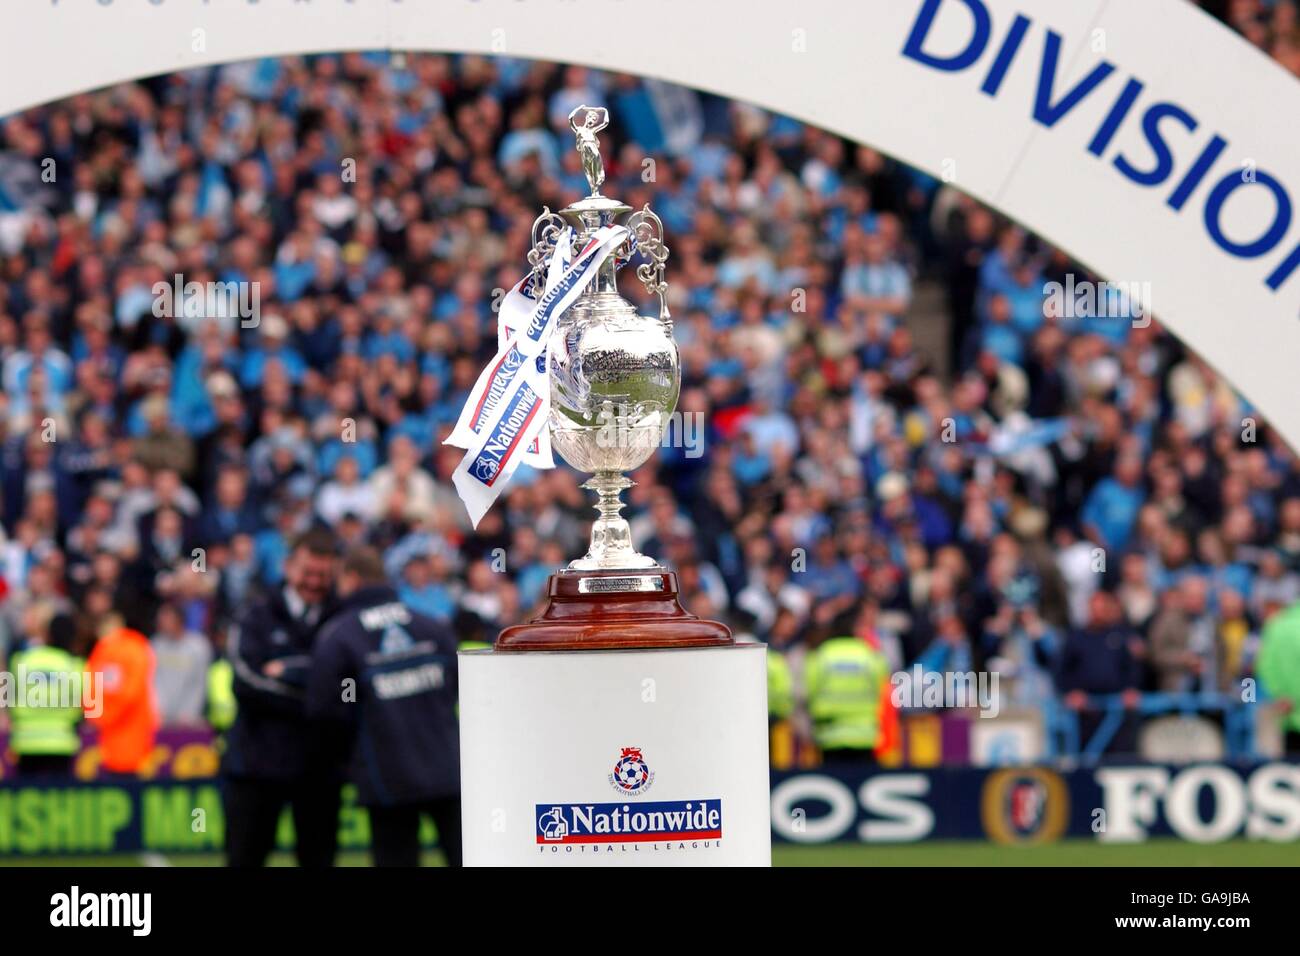 Fußball - Nationwide League Division One - Manchester City / Portsmouth. Die Nationwide First Division Championship Trophy Stockfoto